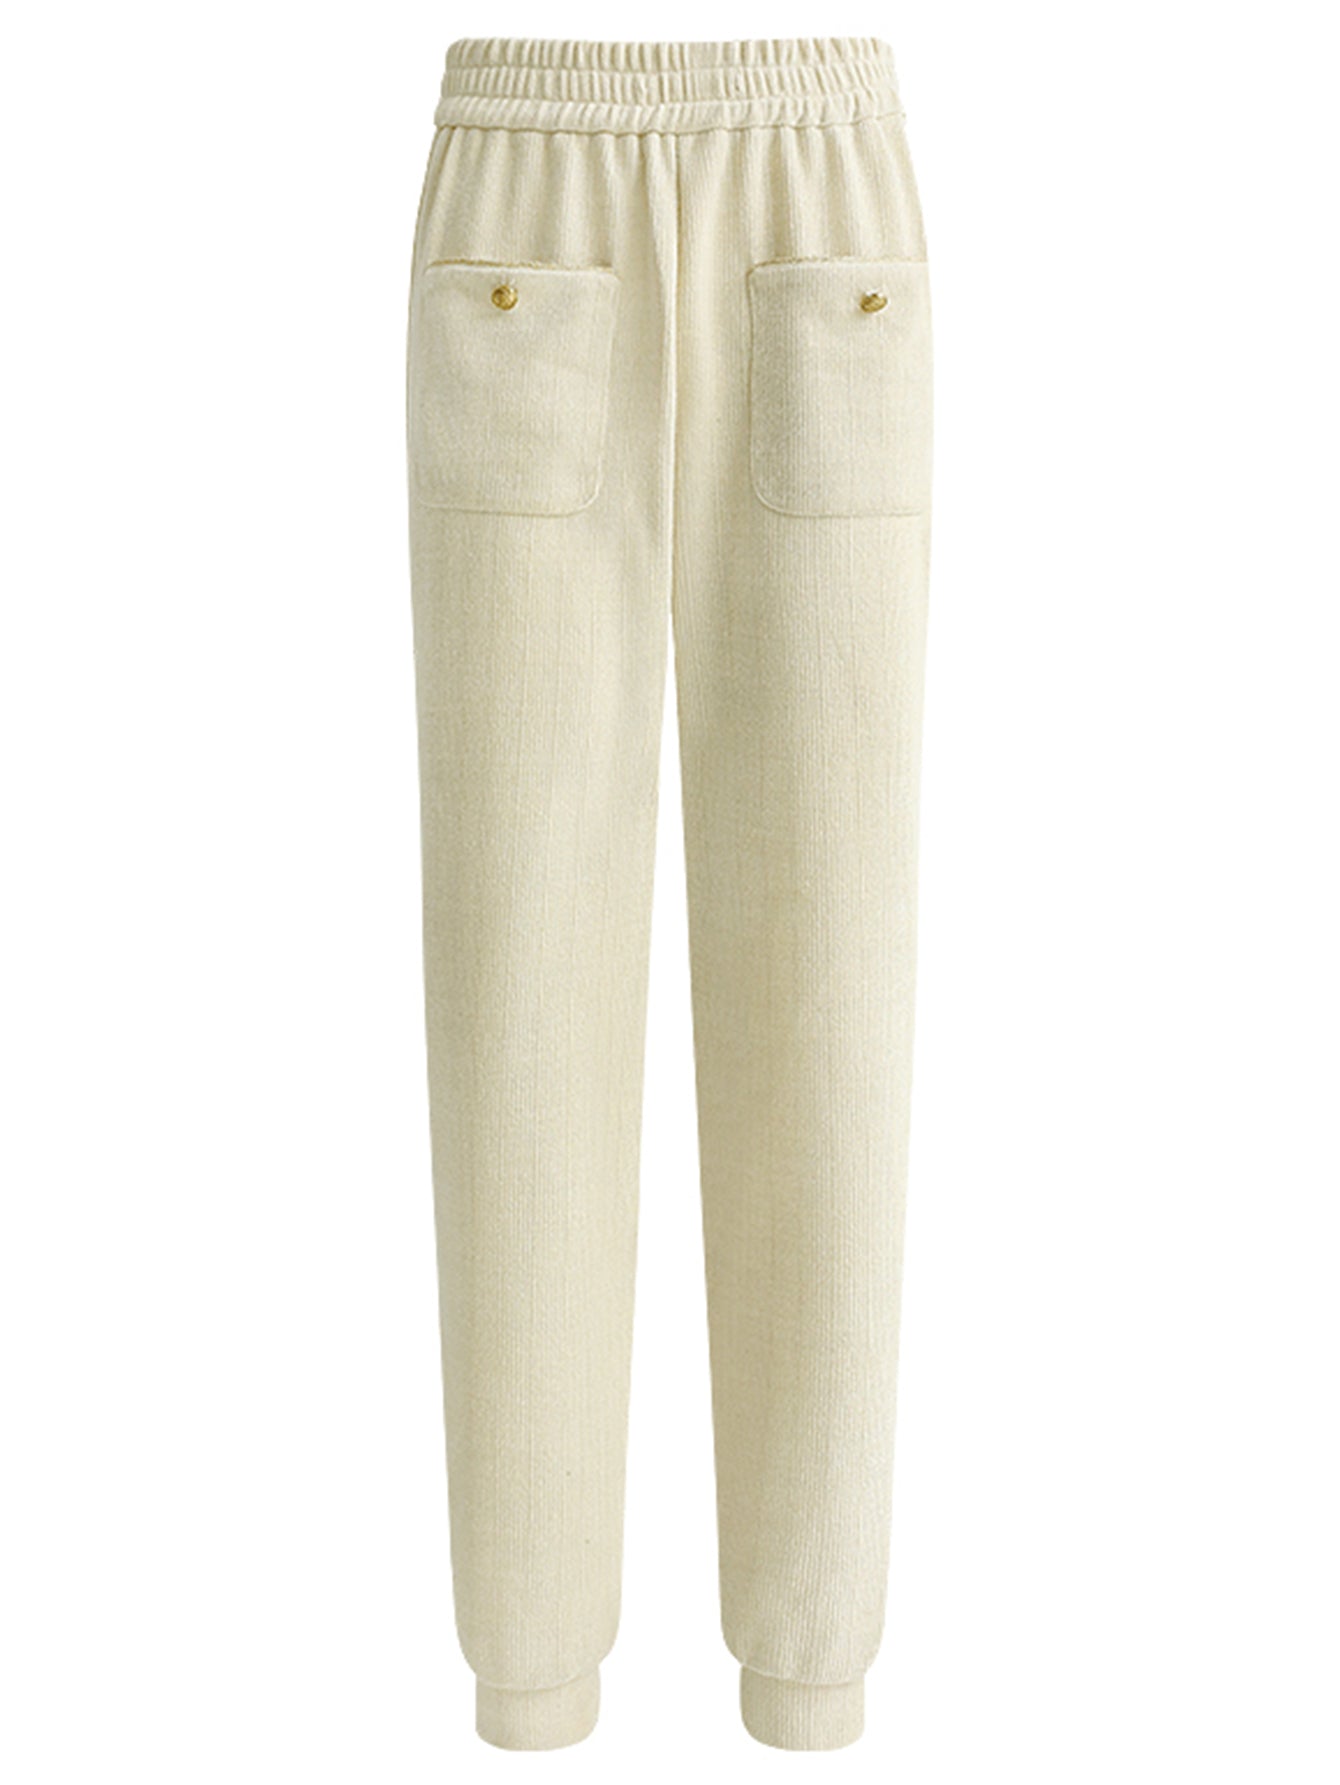 cream-knitted-sweater-pants-with-gold-snap-buttons_all_cream_4.jpg